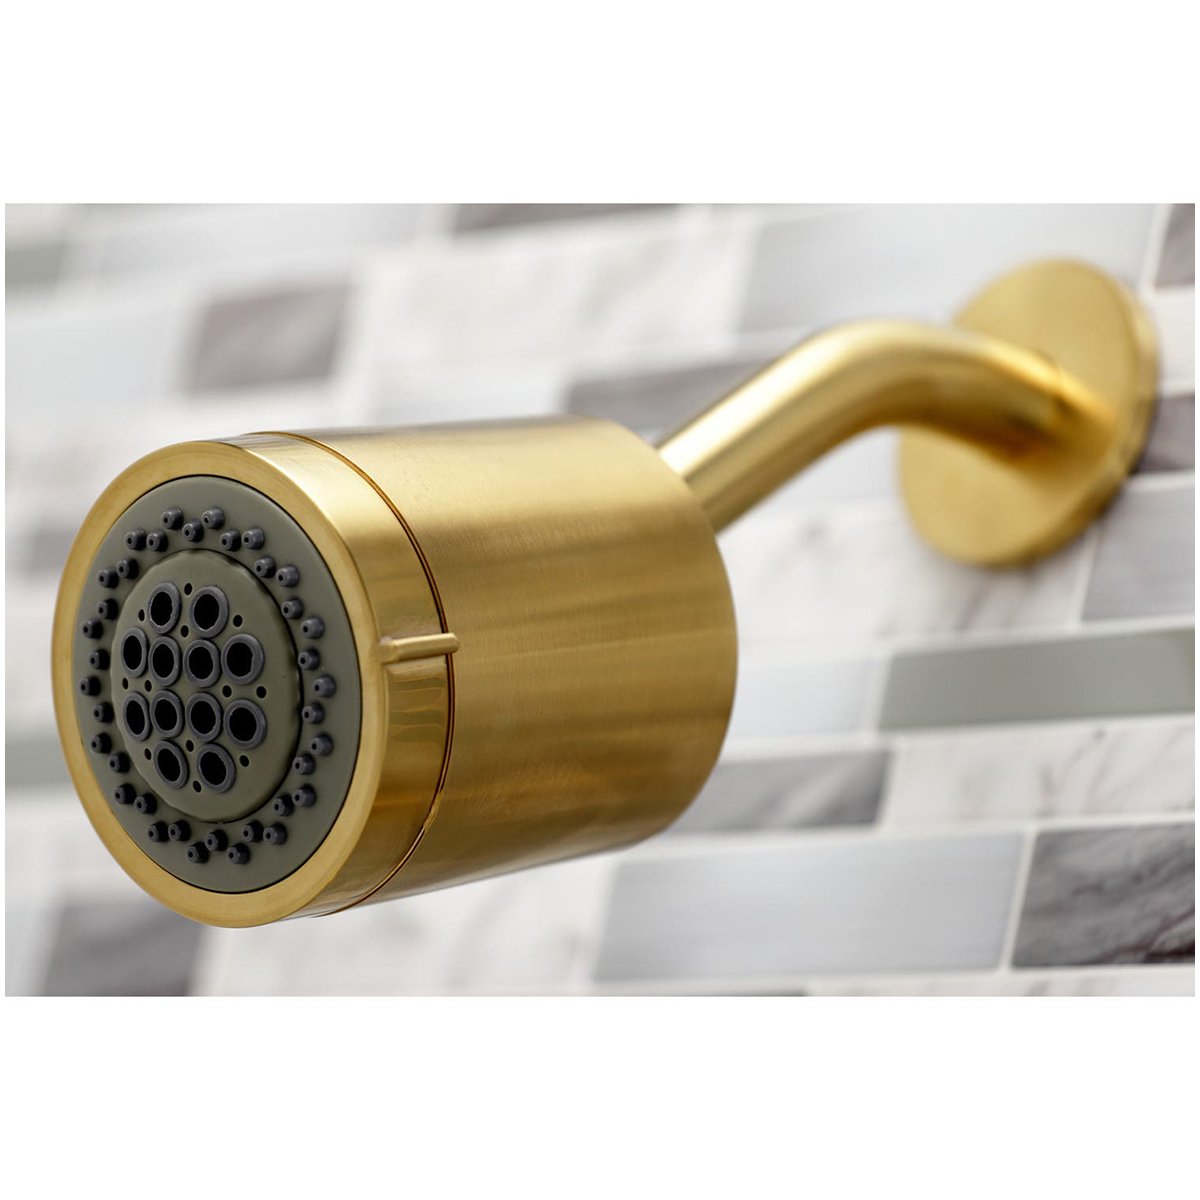 Kingston Brass Paris Two-Handle Tub and Shower Faucet